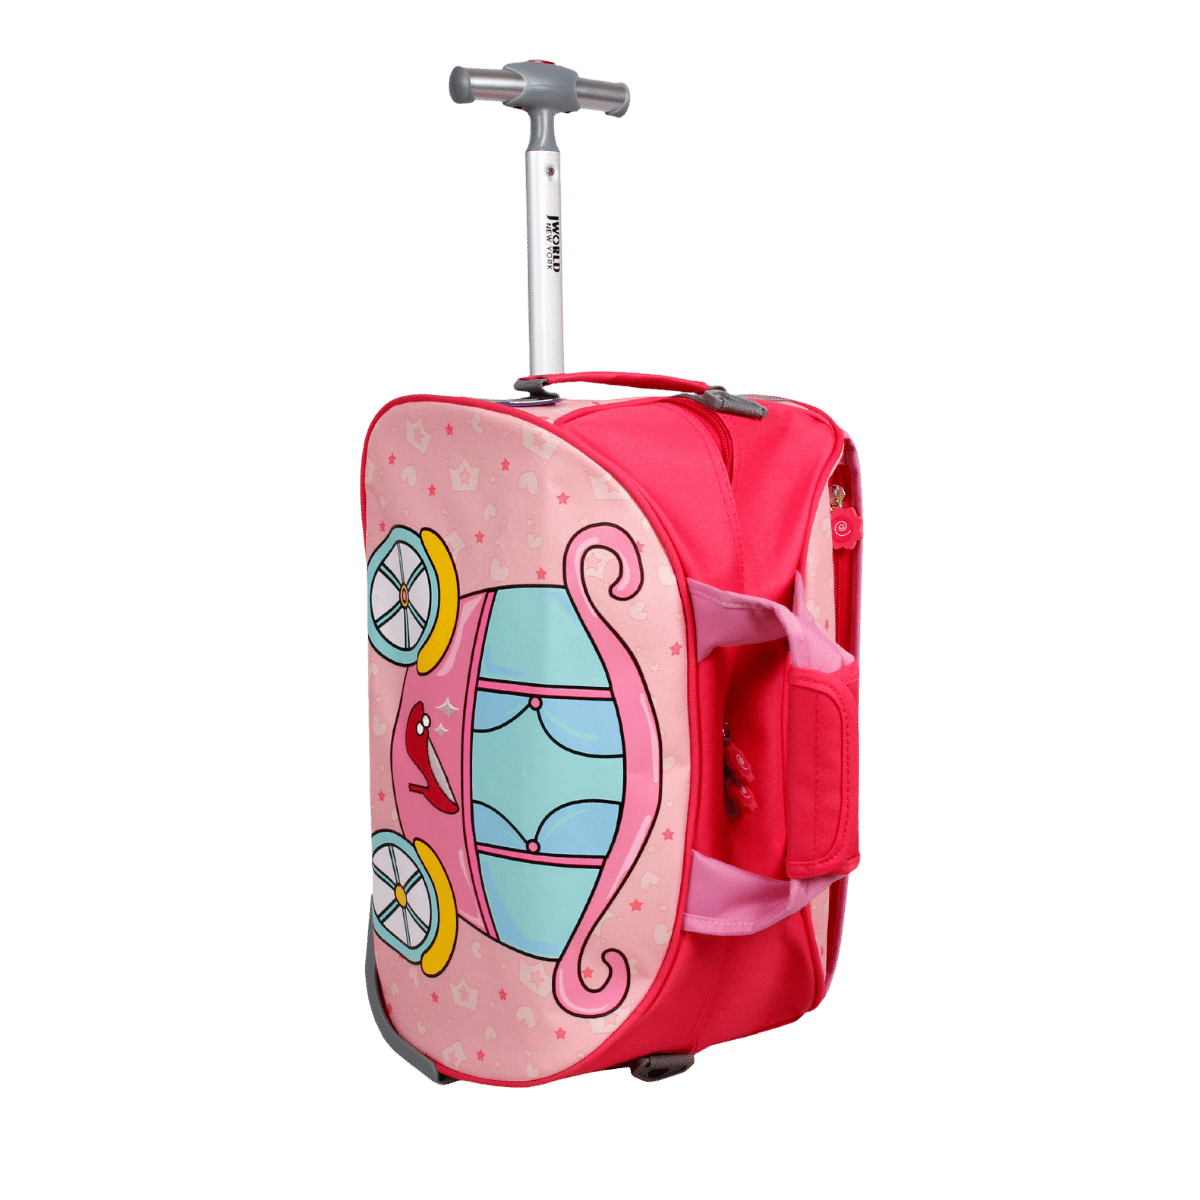 Sanchi Creation 2 16 INCH Kids Cartoon Trolley Bag, For Travelling at Rs  1150/piece in Vadodara